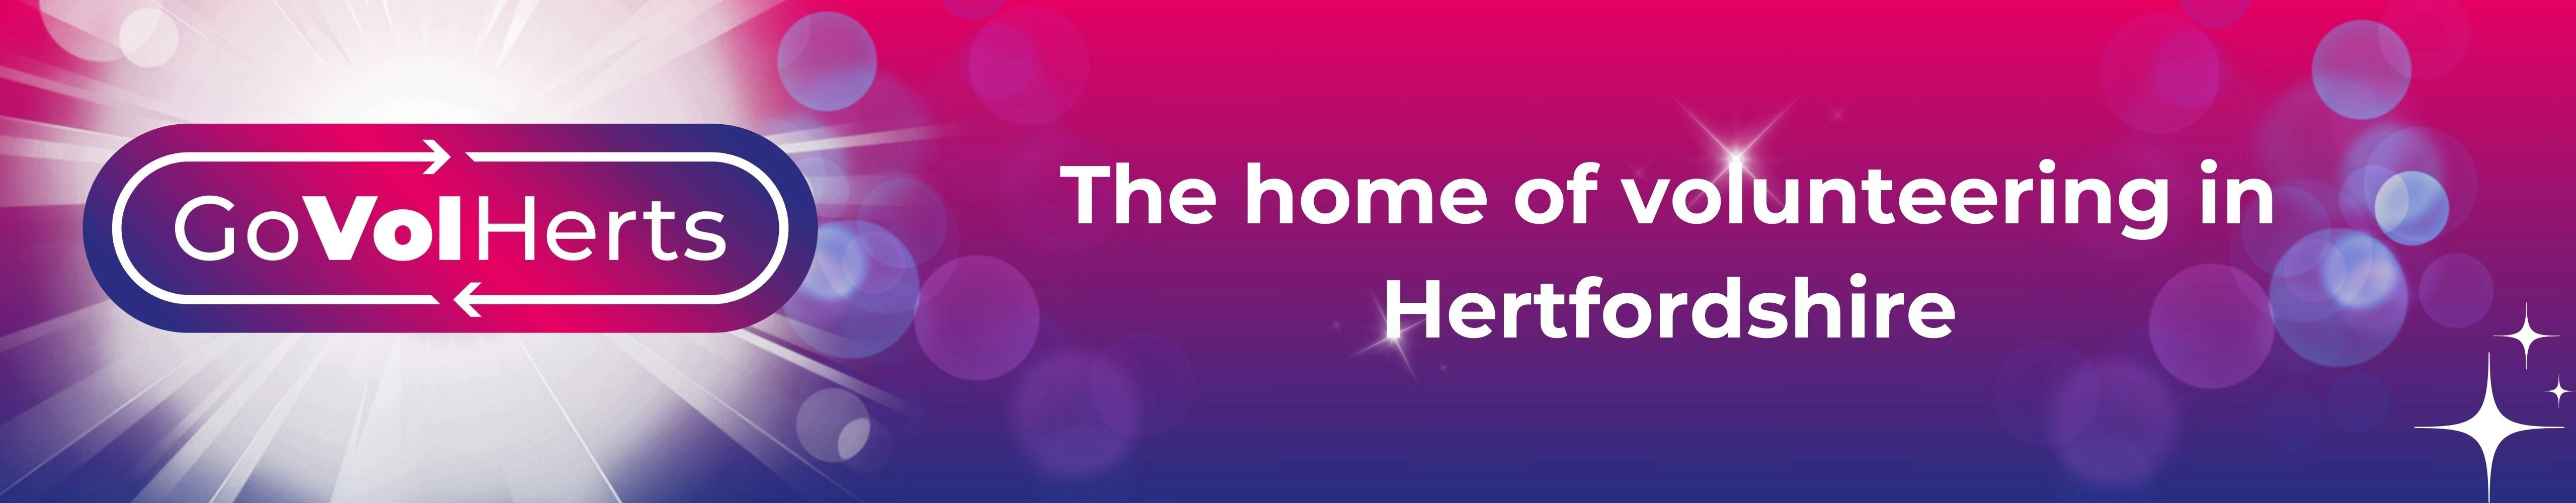 GoVolHerts - The Home of Volunteering in Hertfordshire